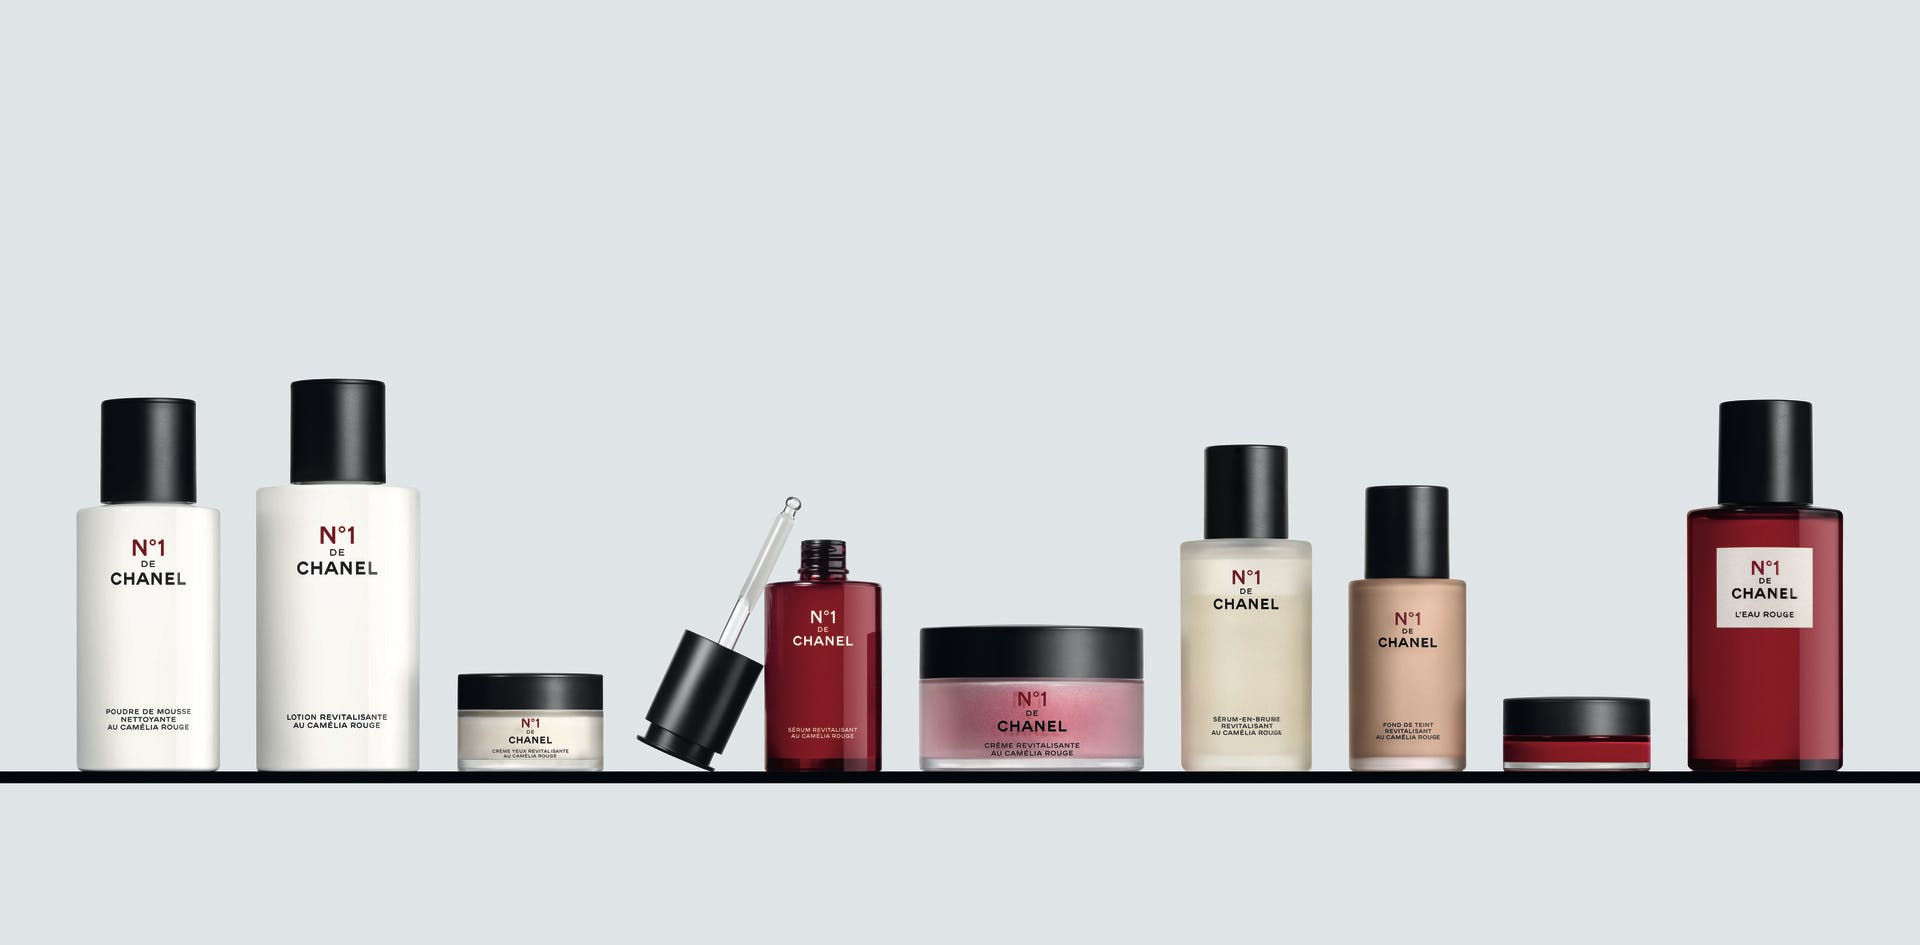 Chanel: Radiate positivity with new Nº1 de Chanel red camellia skincare